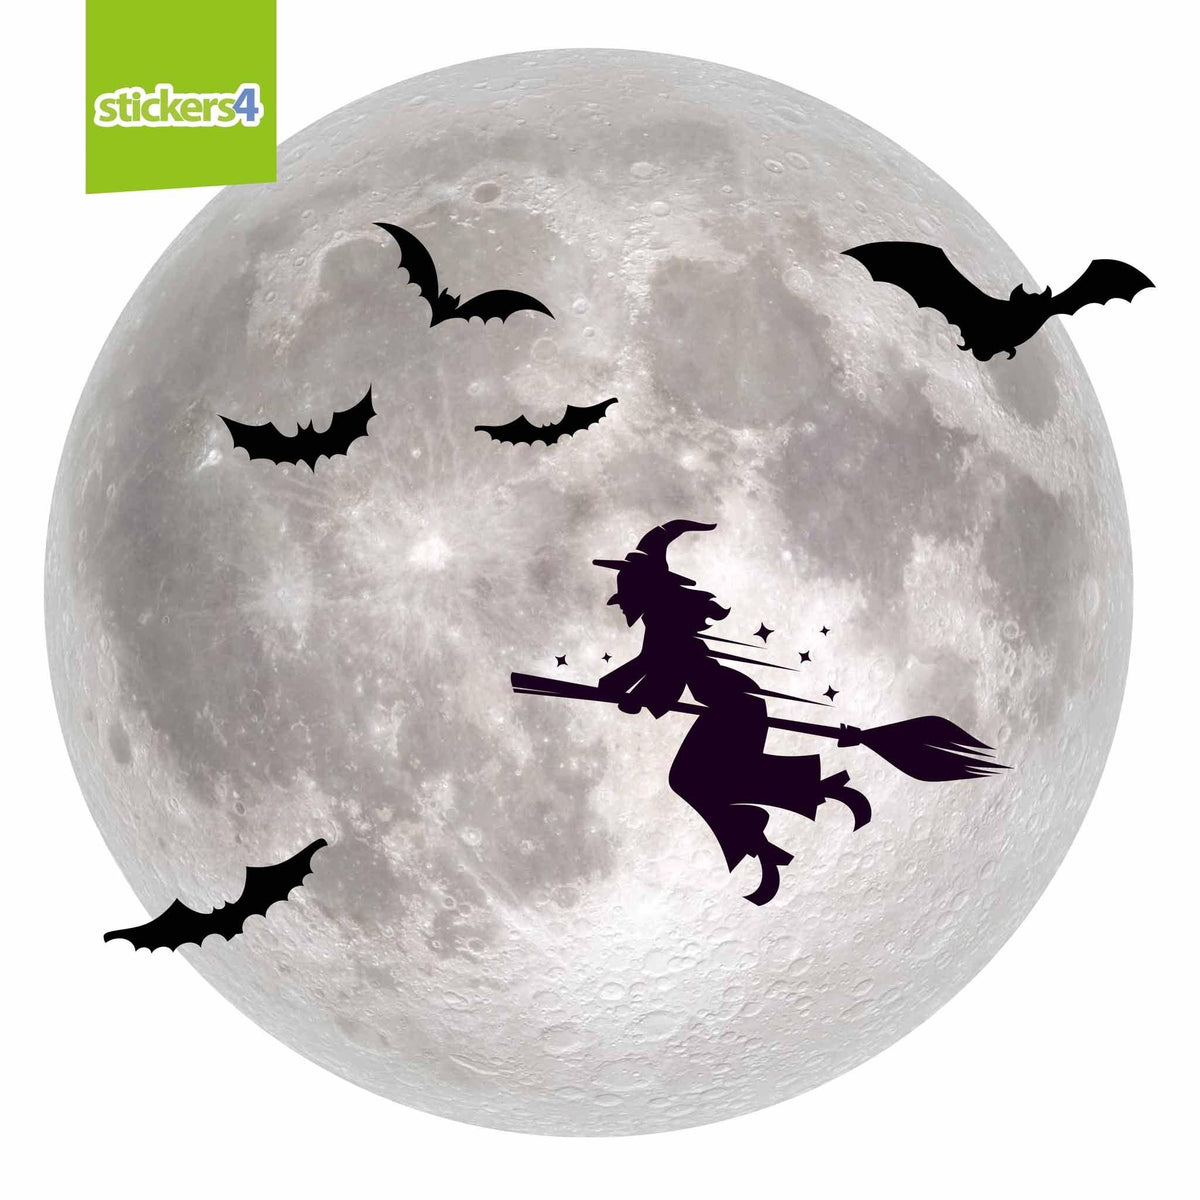 Full Moon with Witch &amp; Bats Silhouette Window Sticker Halloween Display